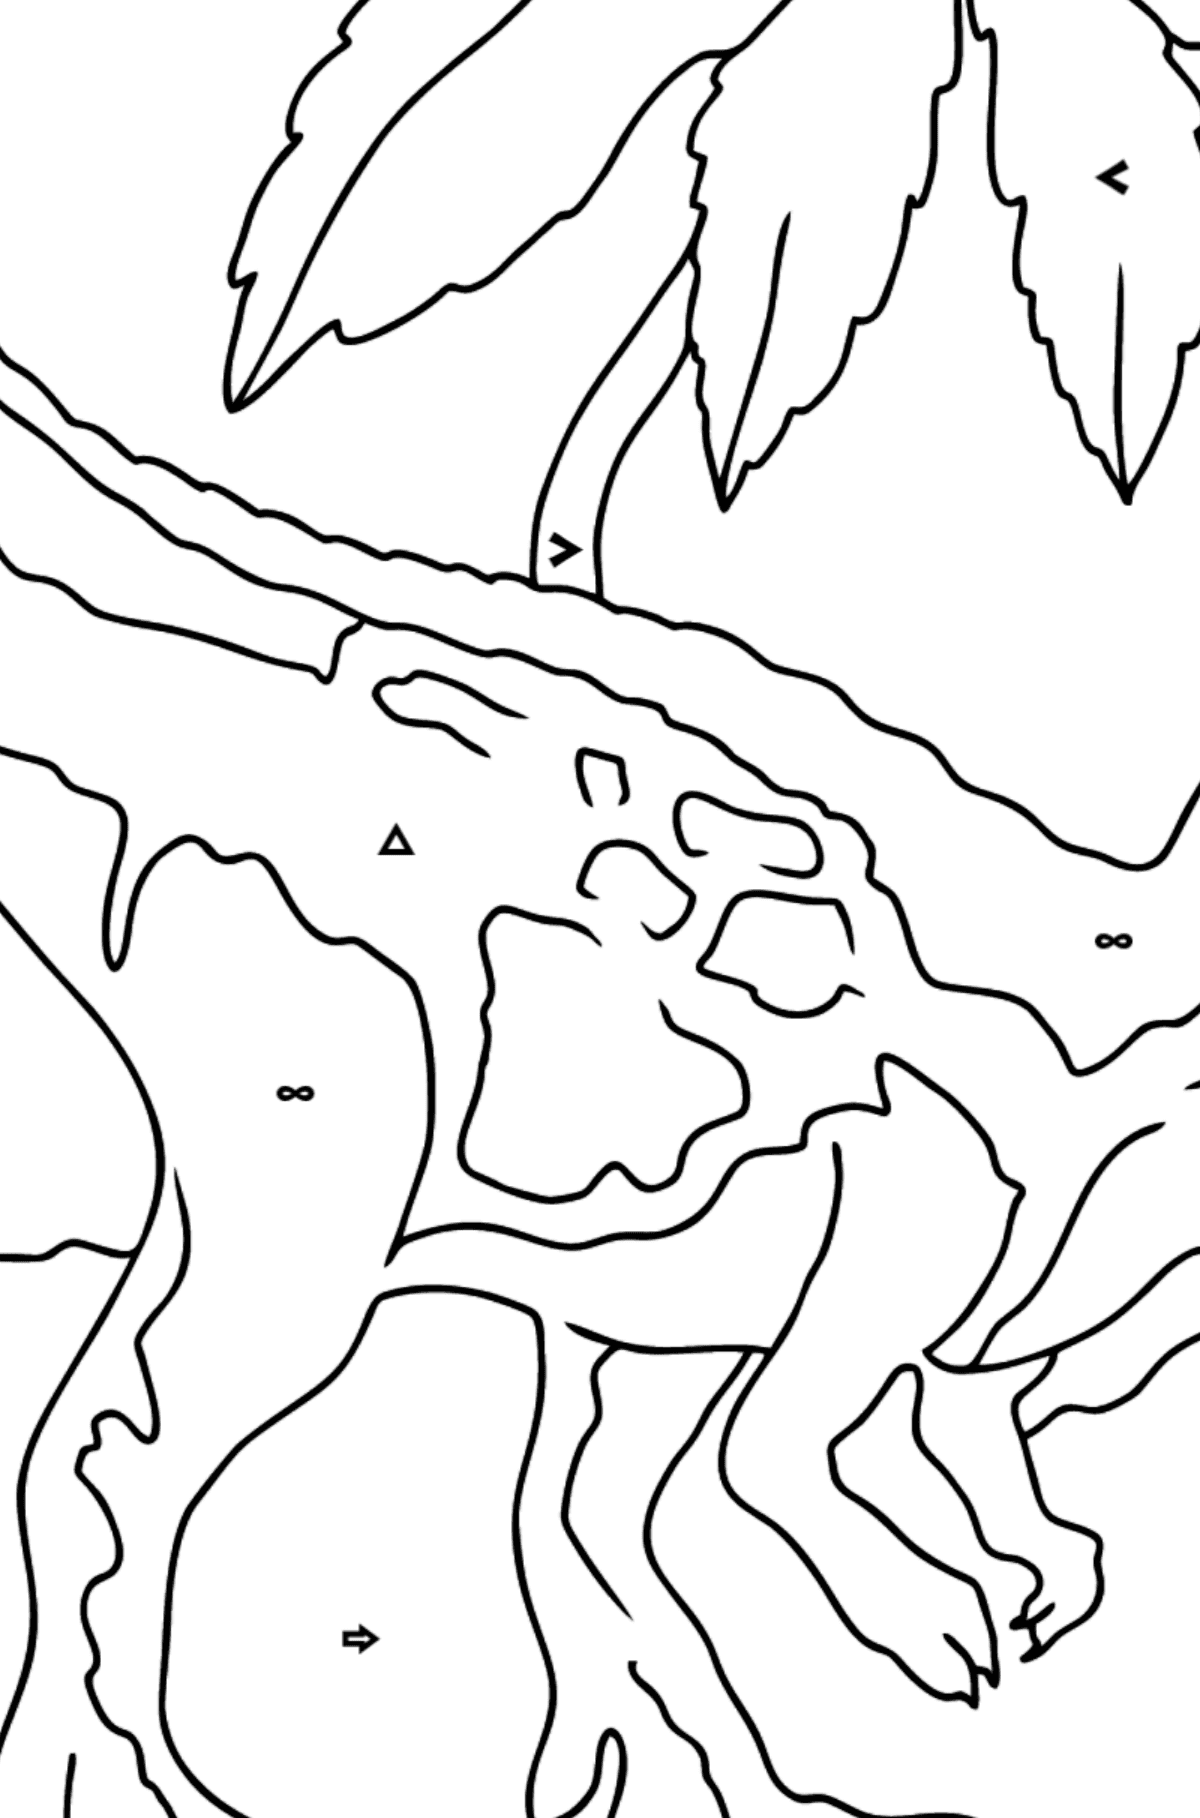 Coloring Page - Tyrannosaurus - The Best Hunter Among Dinosaurs - Coloring by Symbols and Geometric Shapes for Kids